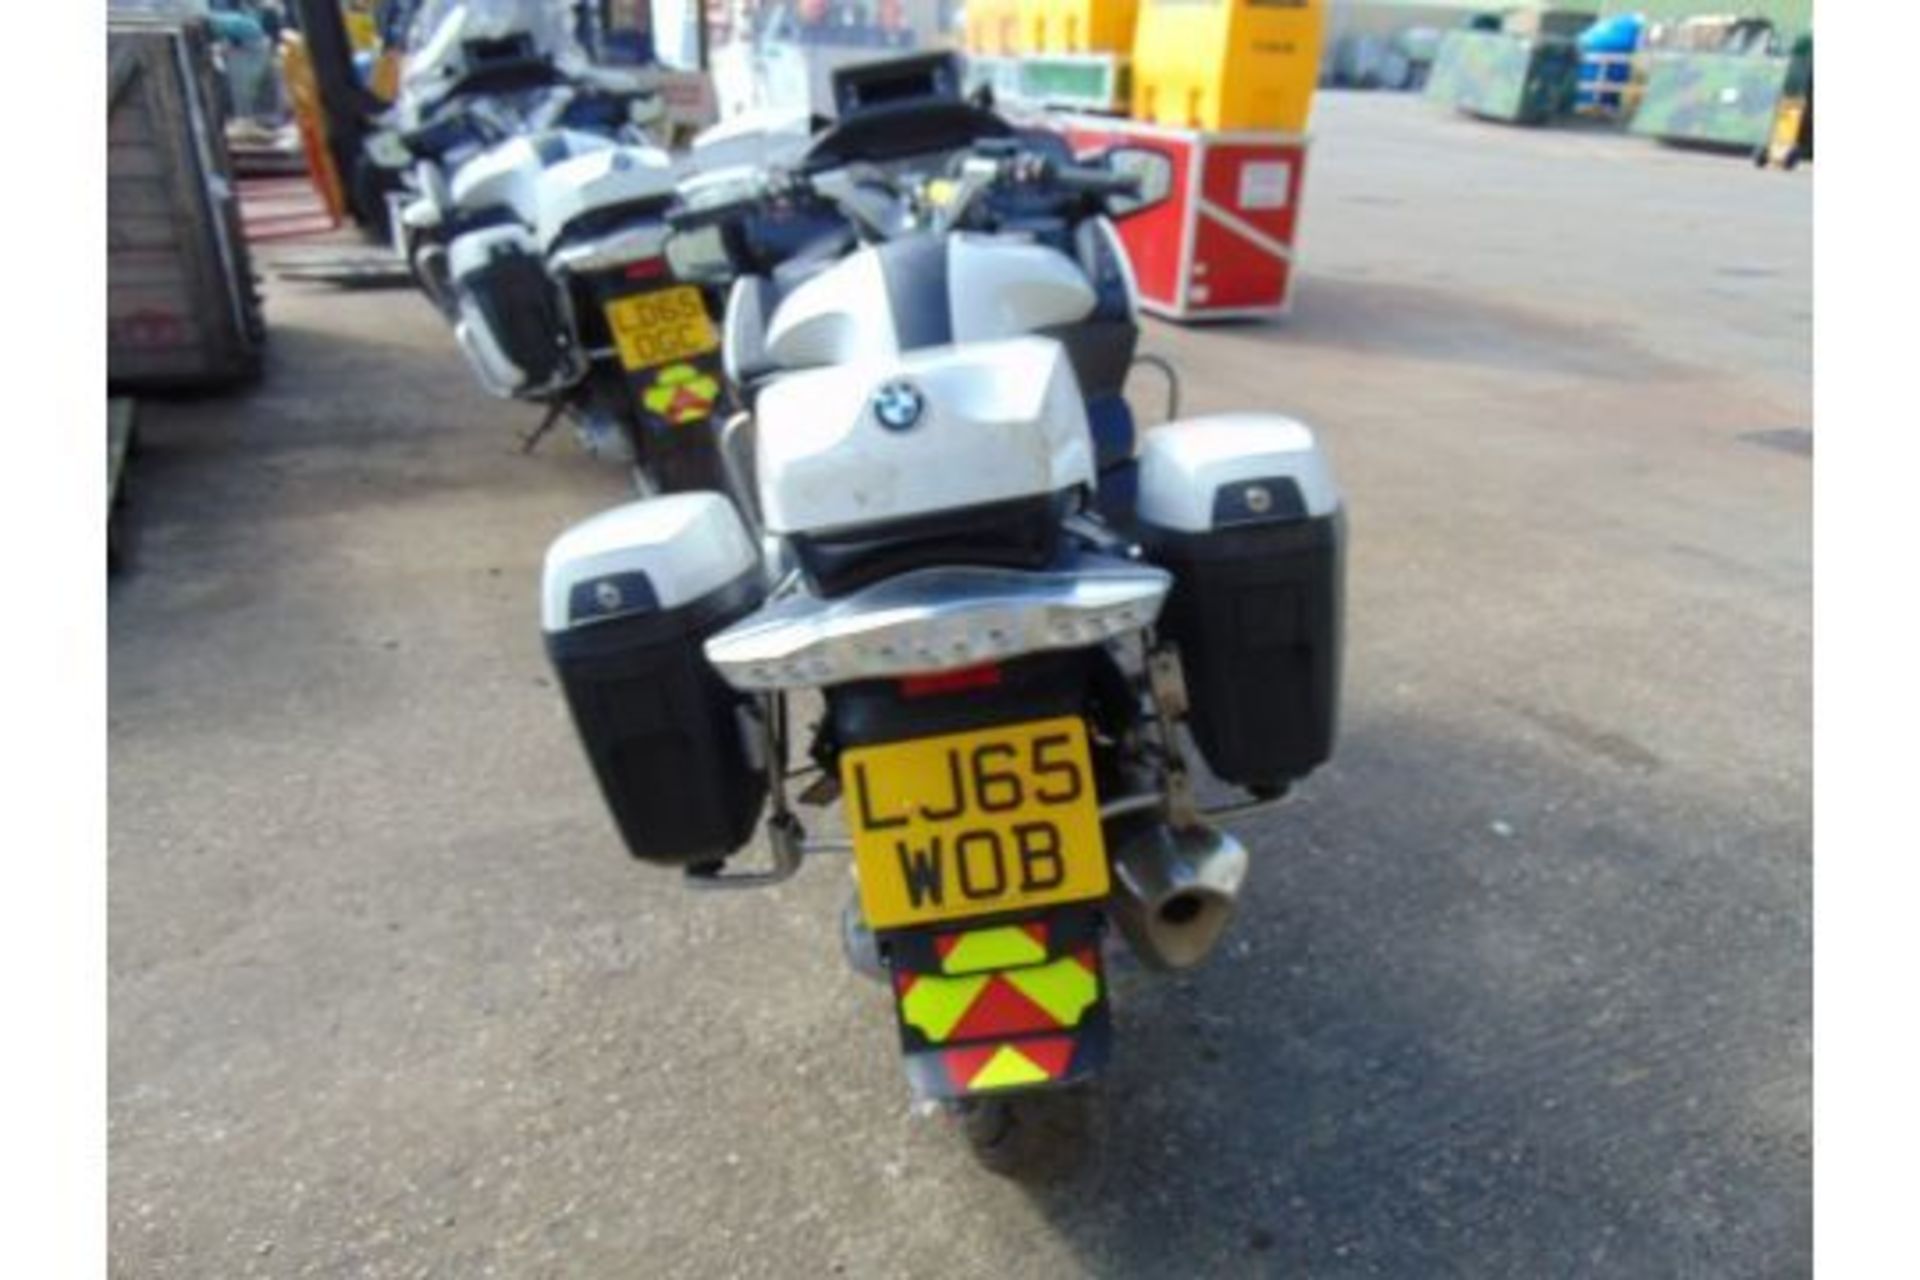 2015 BMW R1200RT Motorbike - Recent release from UK Police - Image 7 of 19